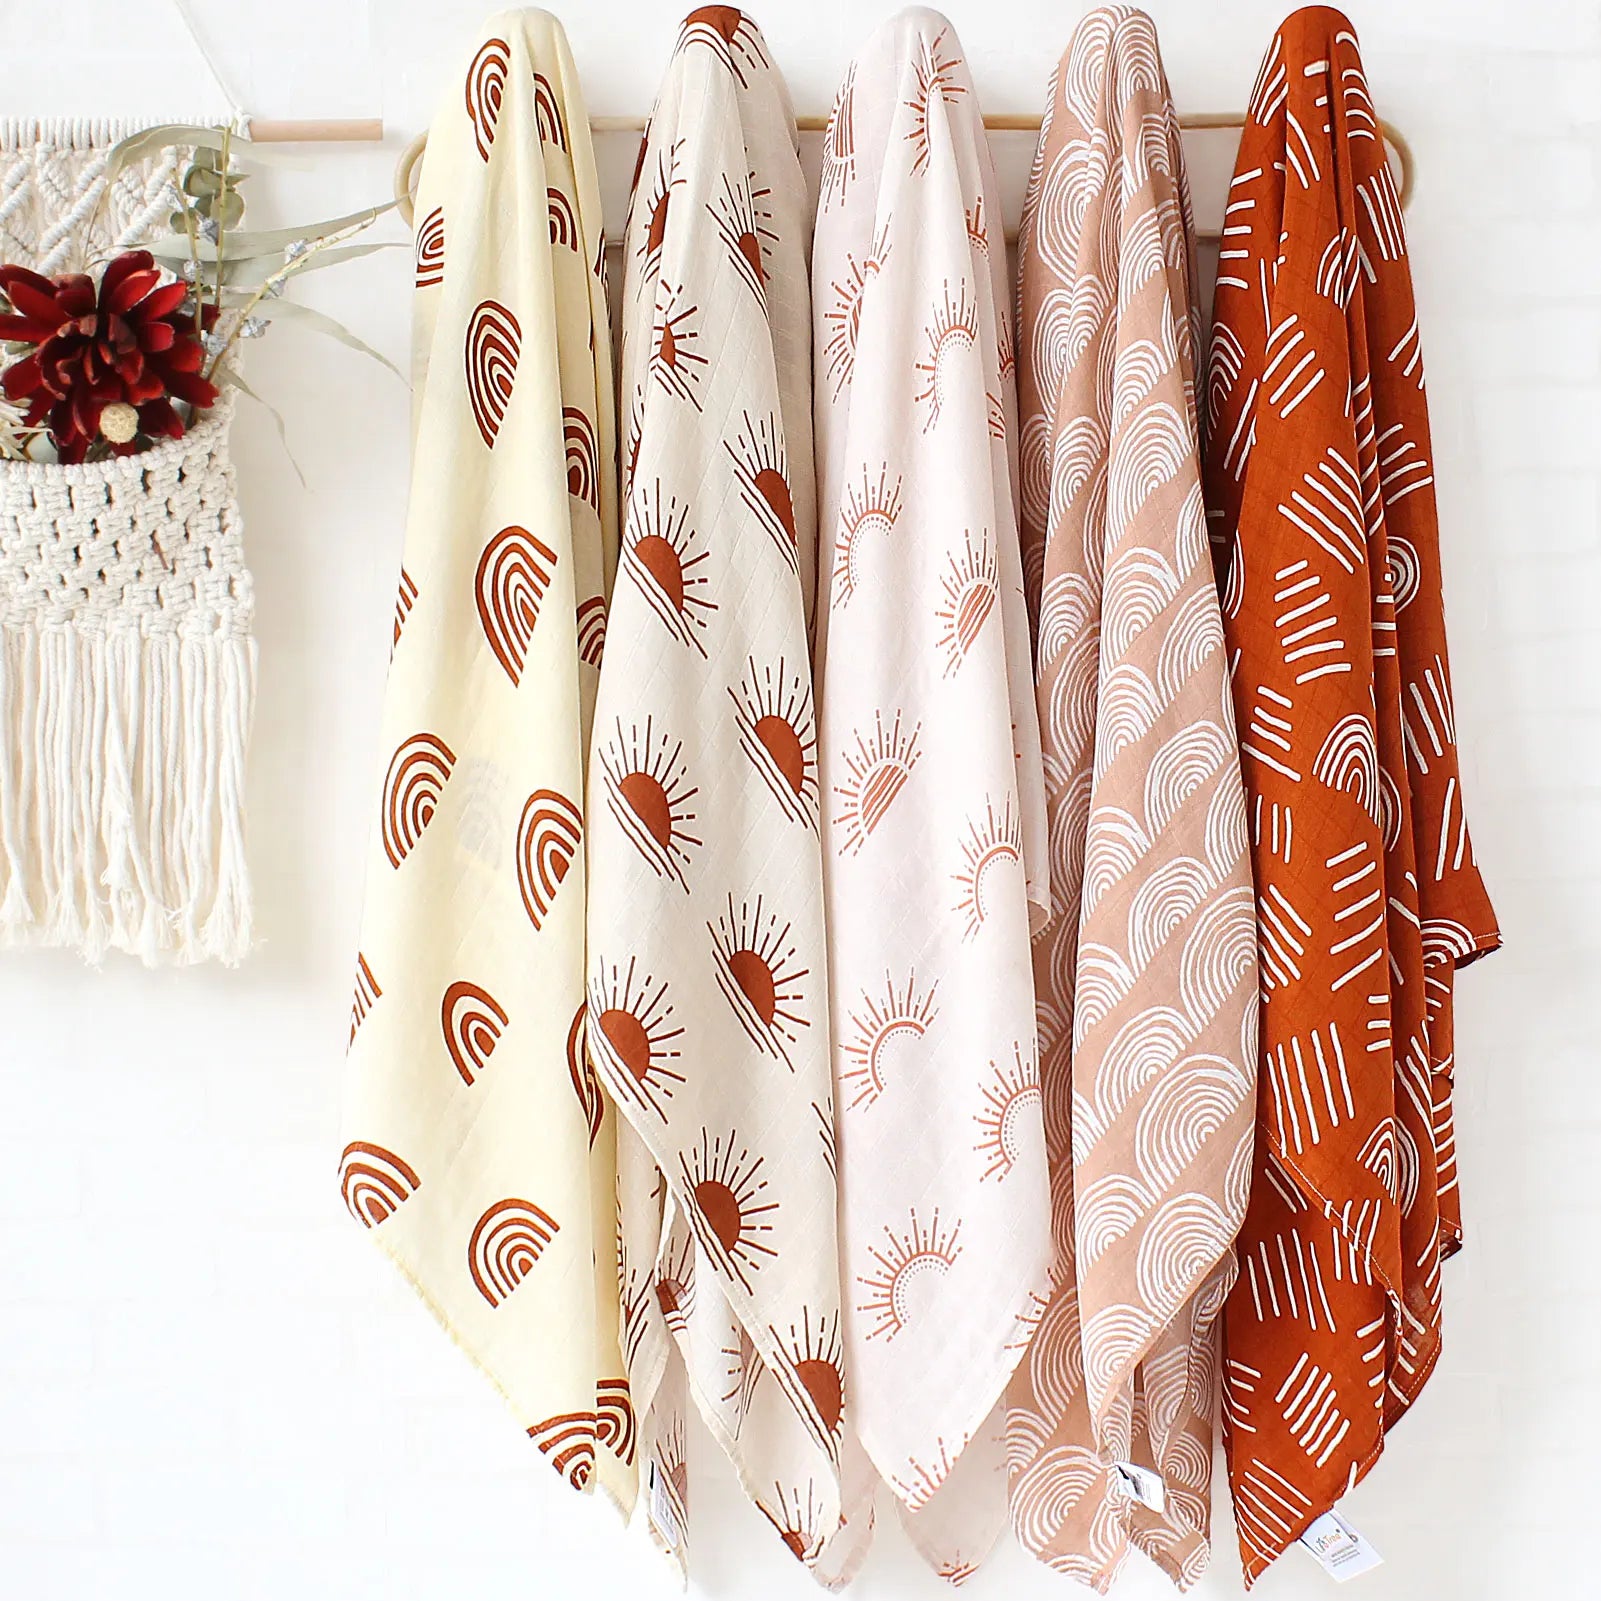 Bamboo Cotton Muslin Swaddle Baby Blanket various patterns